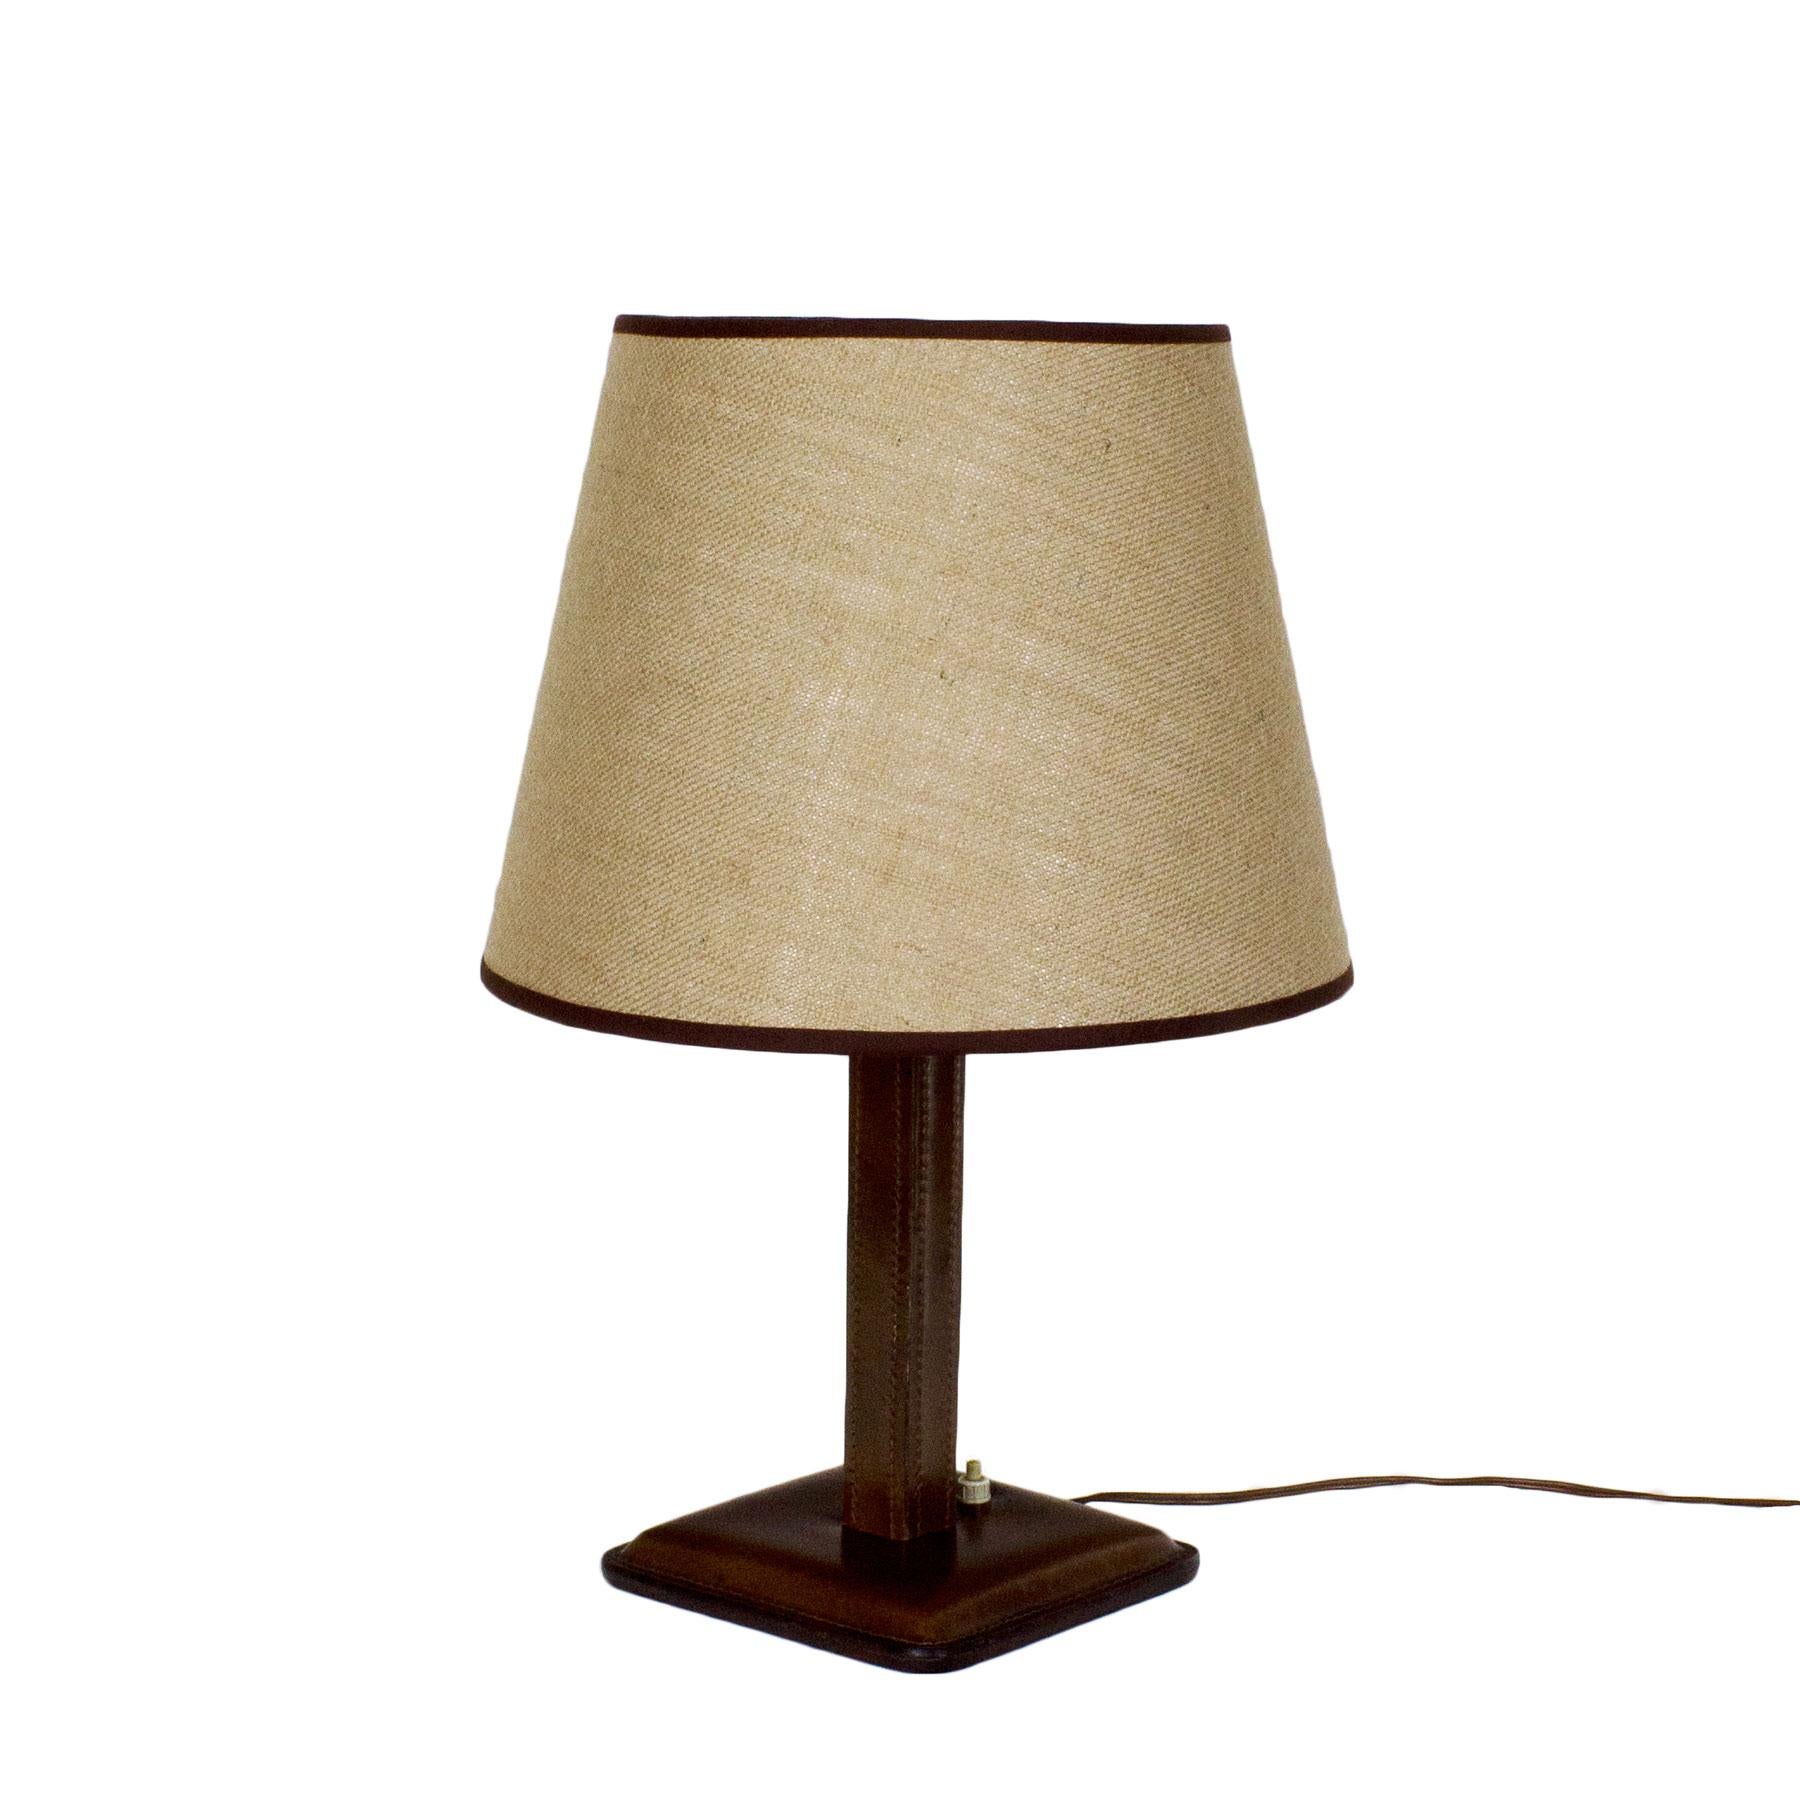 Table lamp, wood covered with leather, light thread sewing, jute lampshade with a brown fabric edging.

Spain, circa 1950.